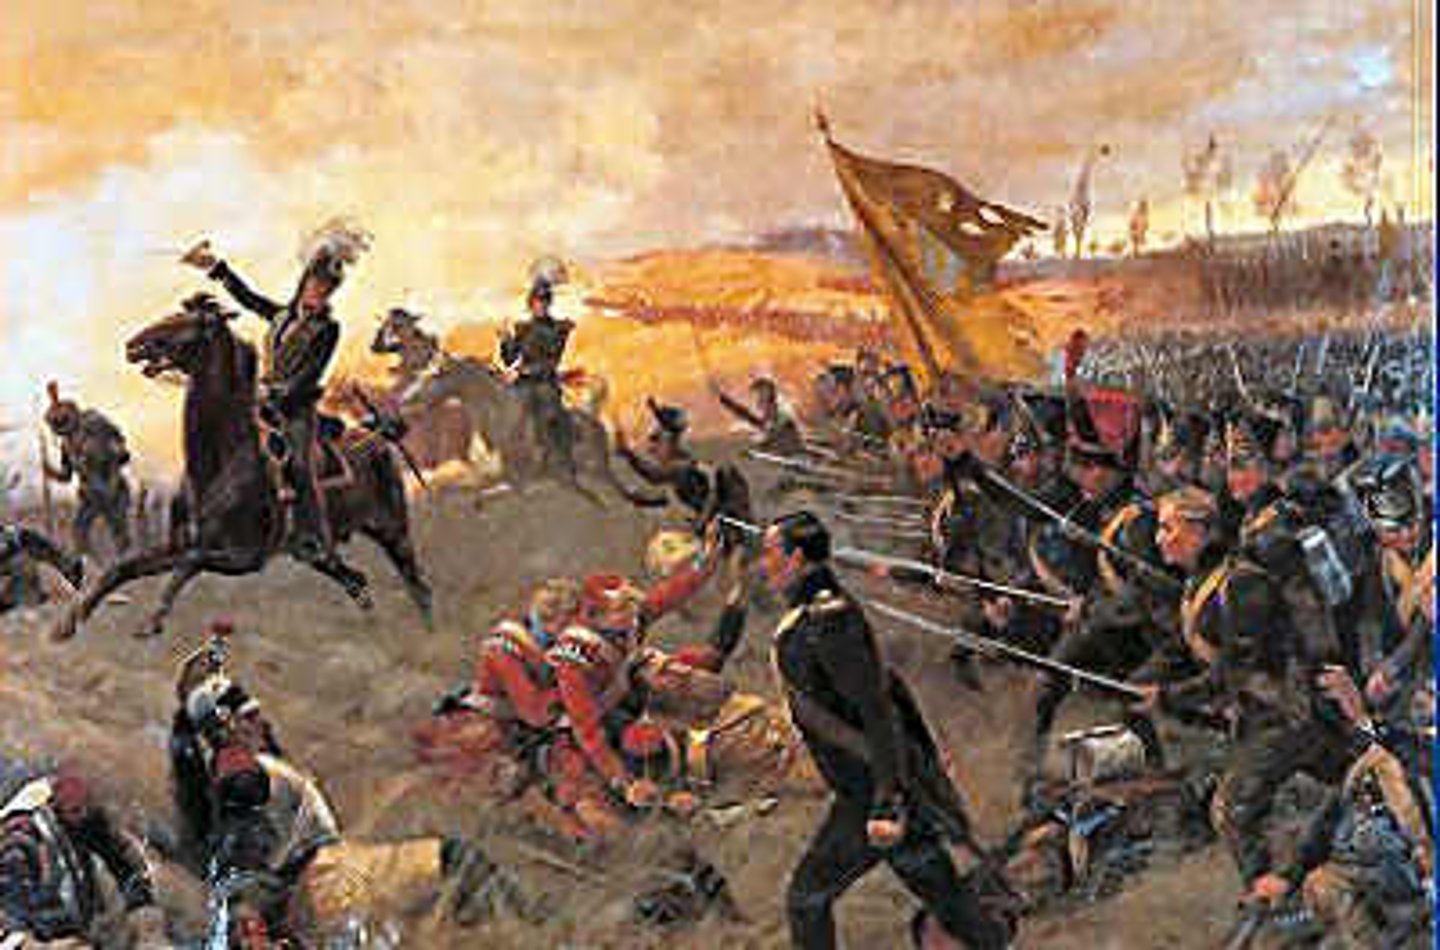 <p>The Battle of Waterloo, in 1815, was the decisive battle in which Napoleon was defeated by a British-led coalition, leading to his exile and the end of the Napoleonic era.</p>